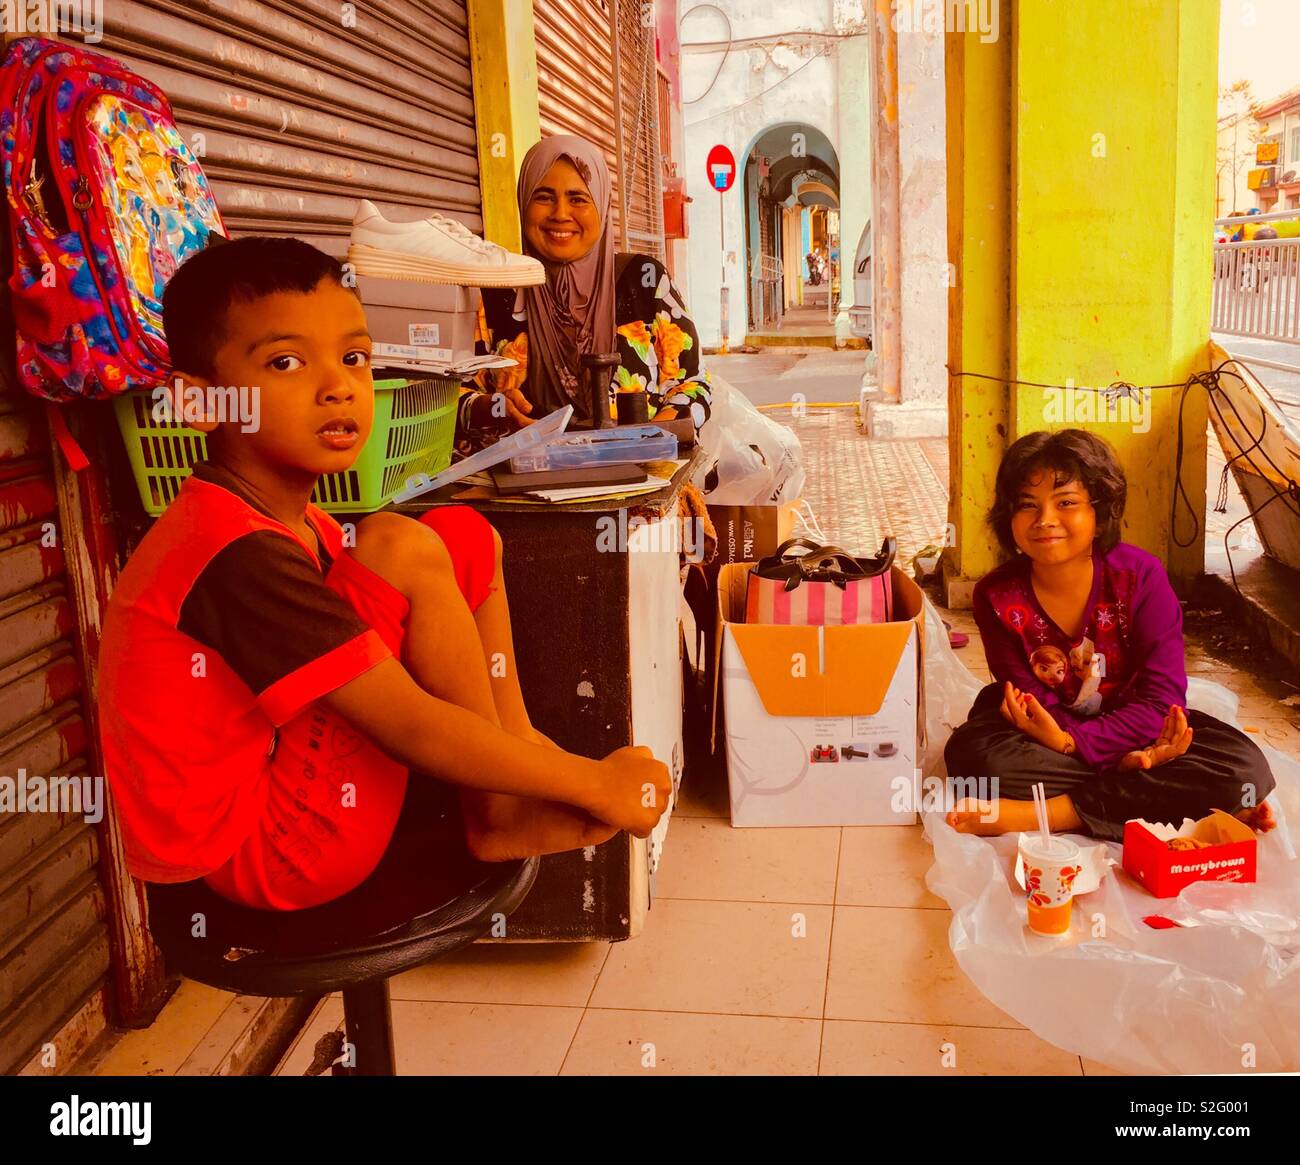 travel-image-of-local-family-in-penang-malaysia-the-mother-is-a